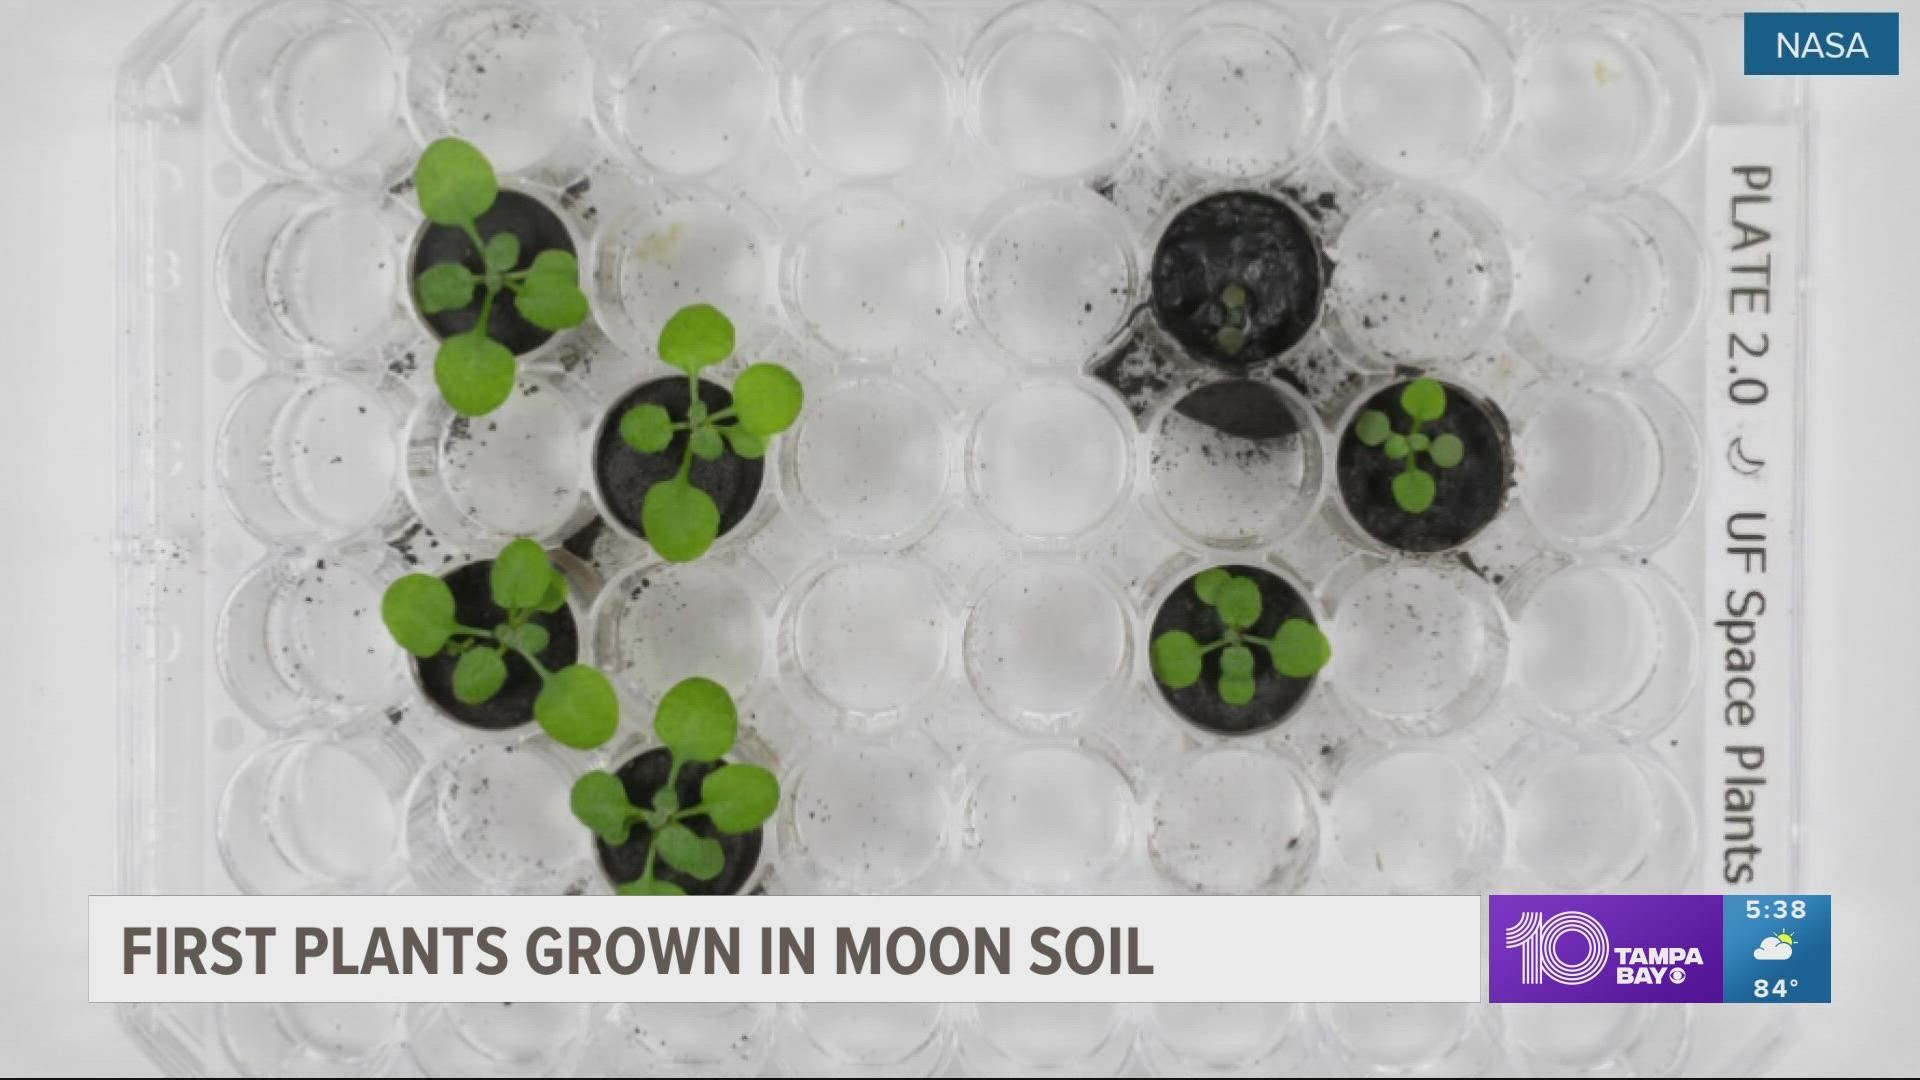 The Florida scientists hope to recycle their lunar soil later this year, planting more thale cress before possibly moving on to other vegetation.